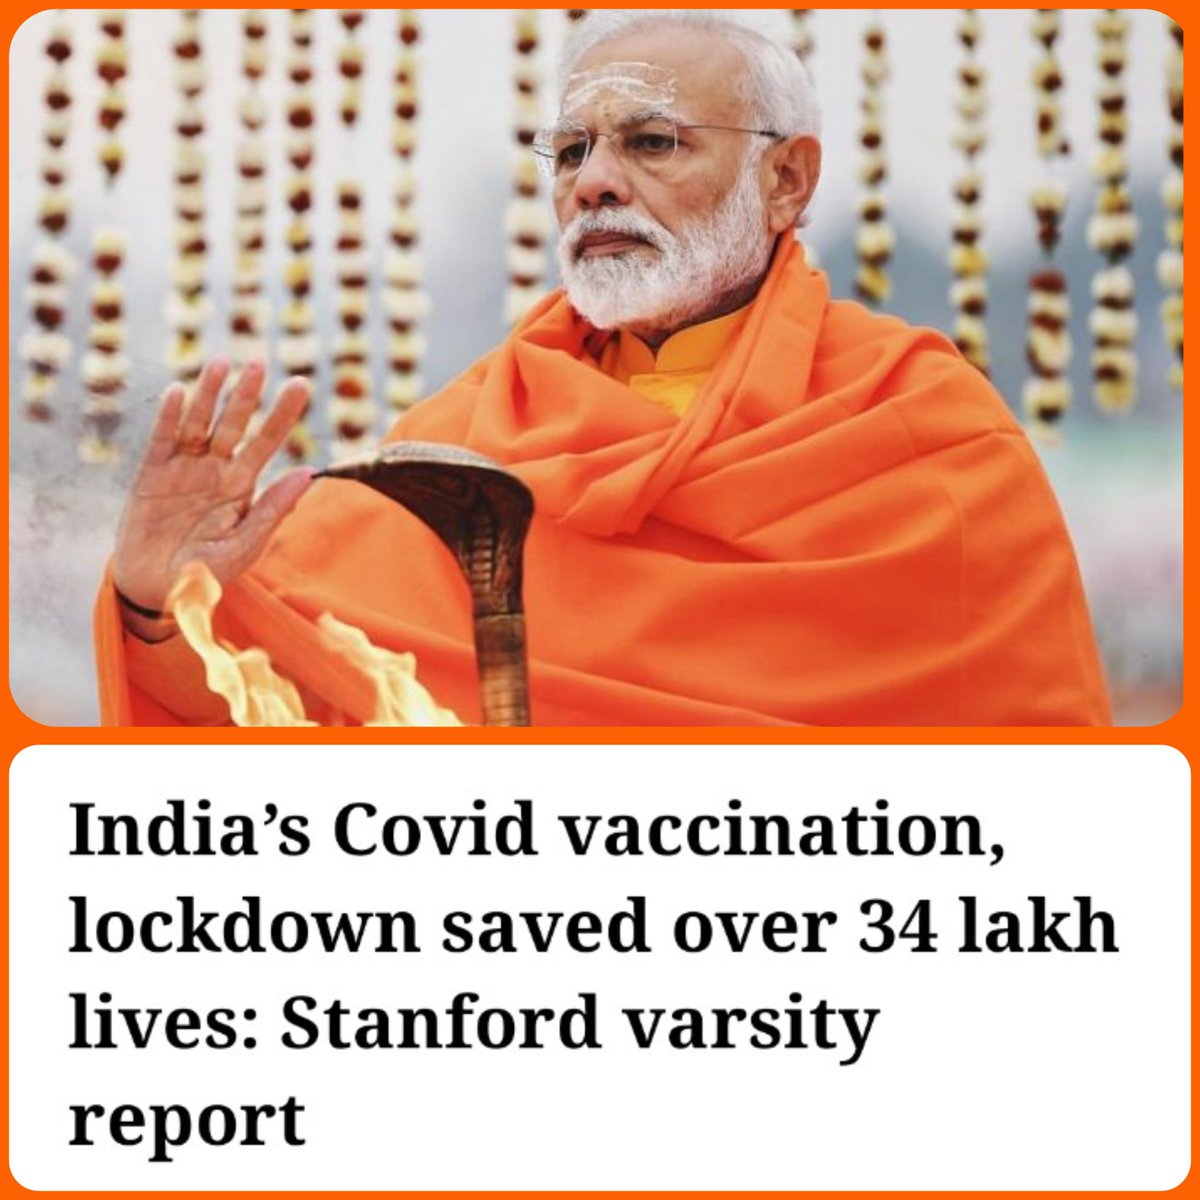 PM Modi saved lives of 34 lac Indians by imposing timely lockdown and by timely vaccination drive 

If there had not been Modi, India cud never make indigenous PPE kit, oxyzen cylinders and vaccines

Crores of people vud have died if there had been Congress govt